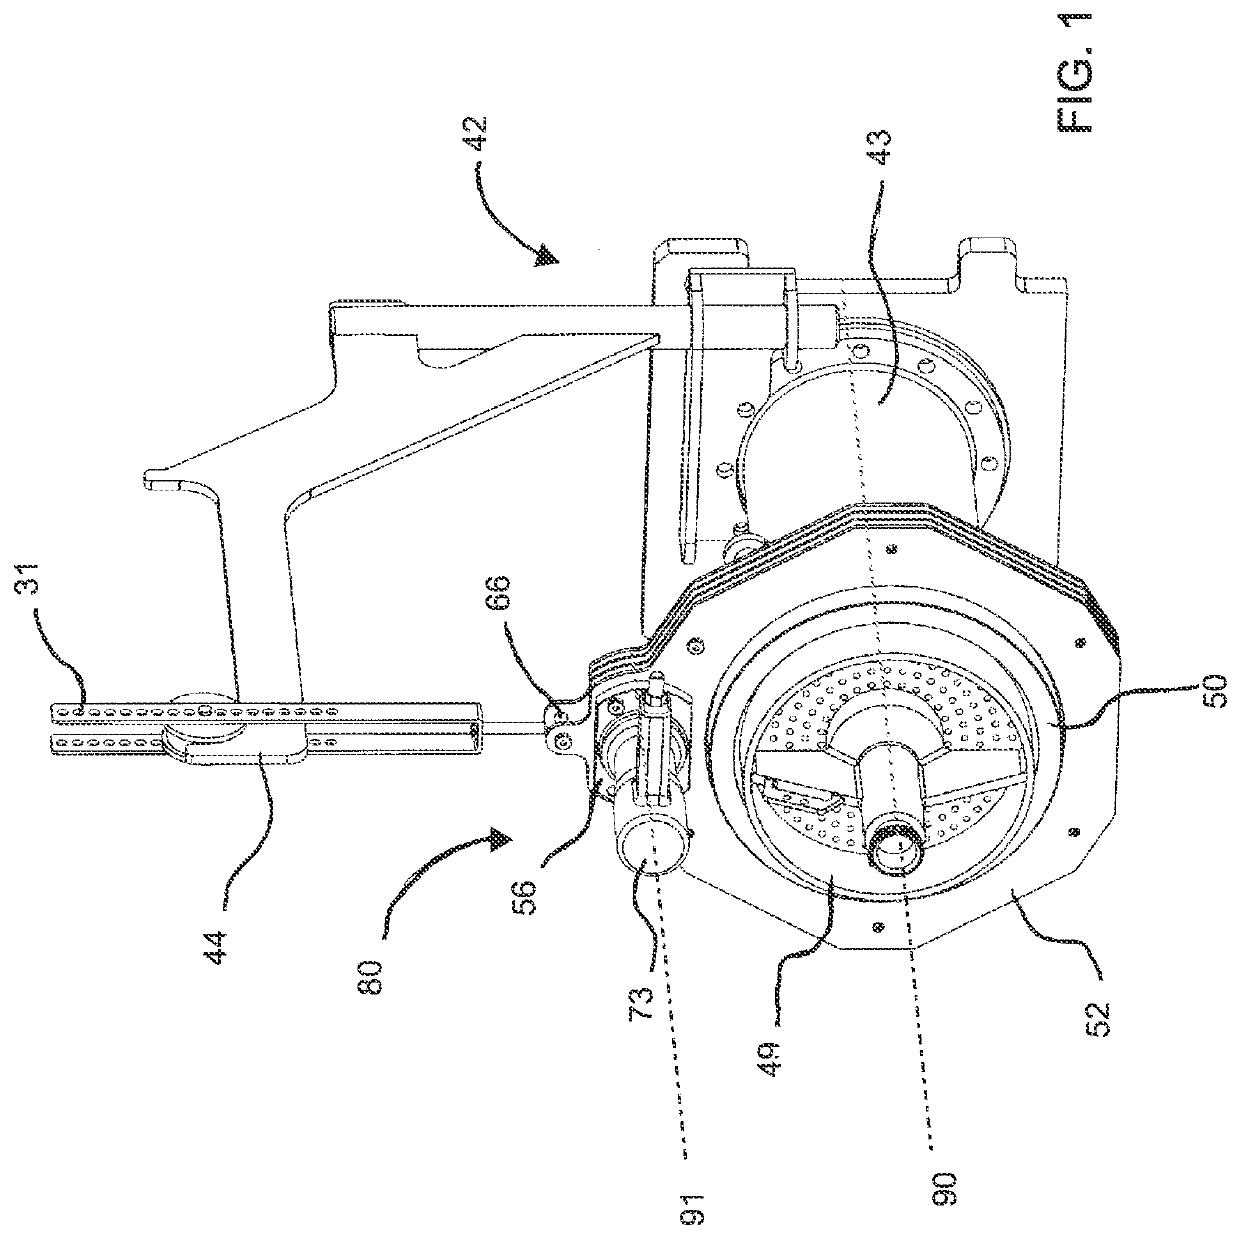 Mounting ring installation system for a meat grinding system